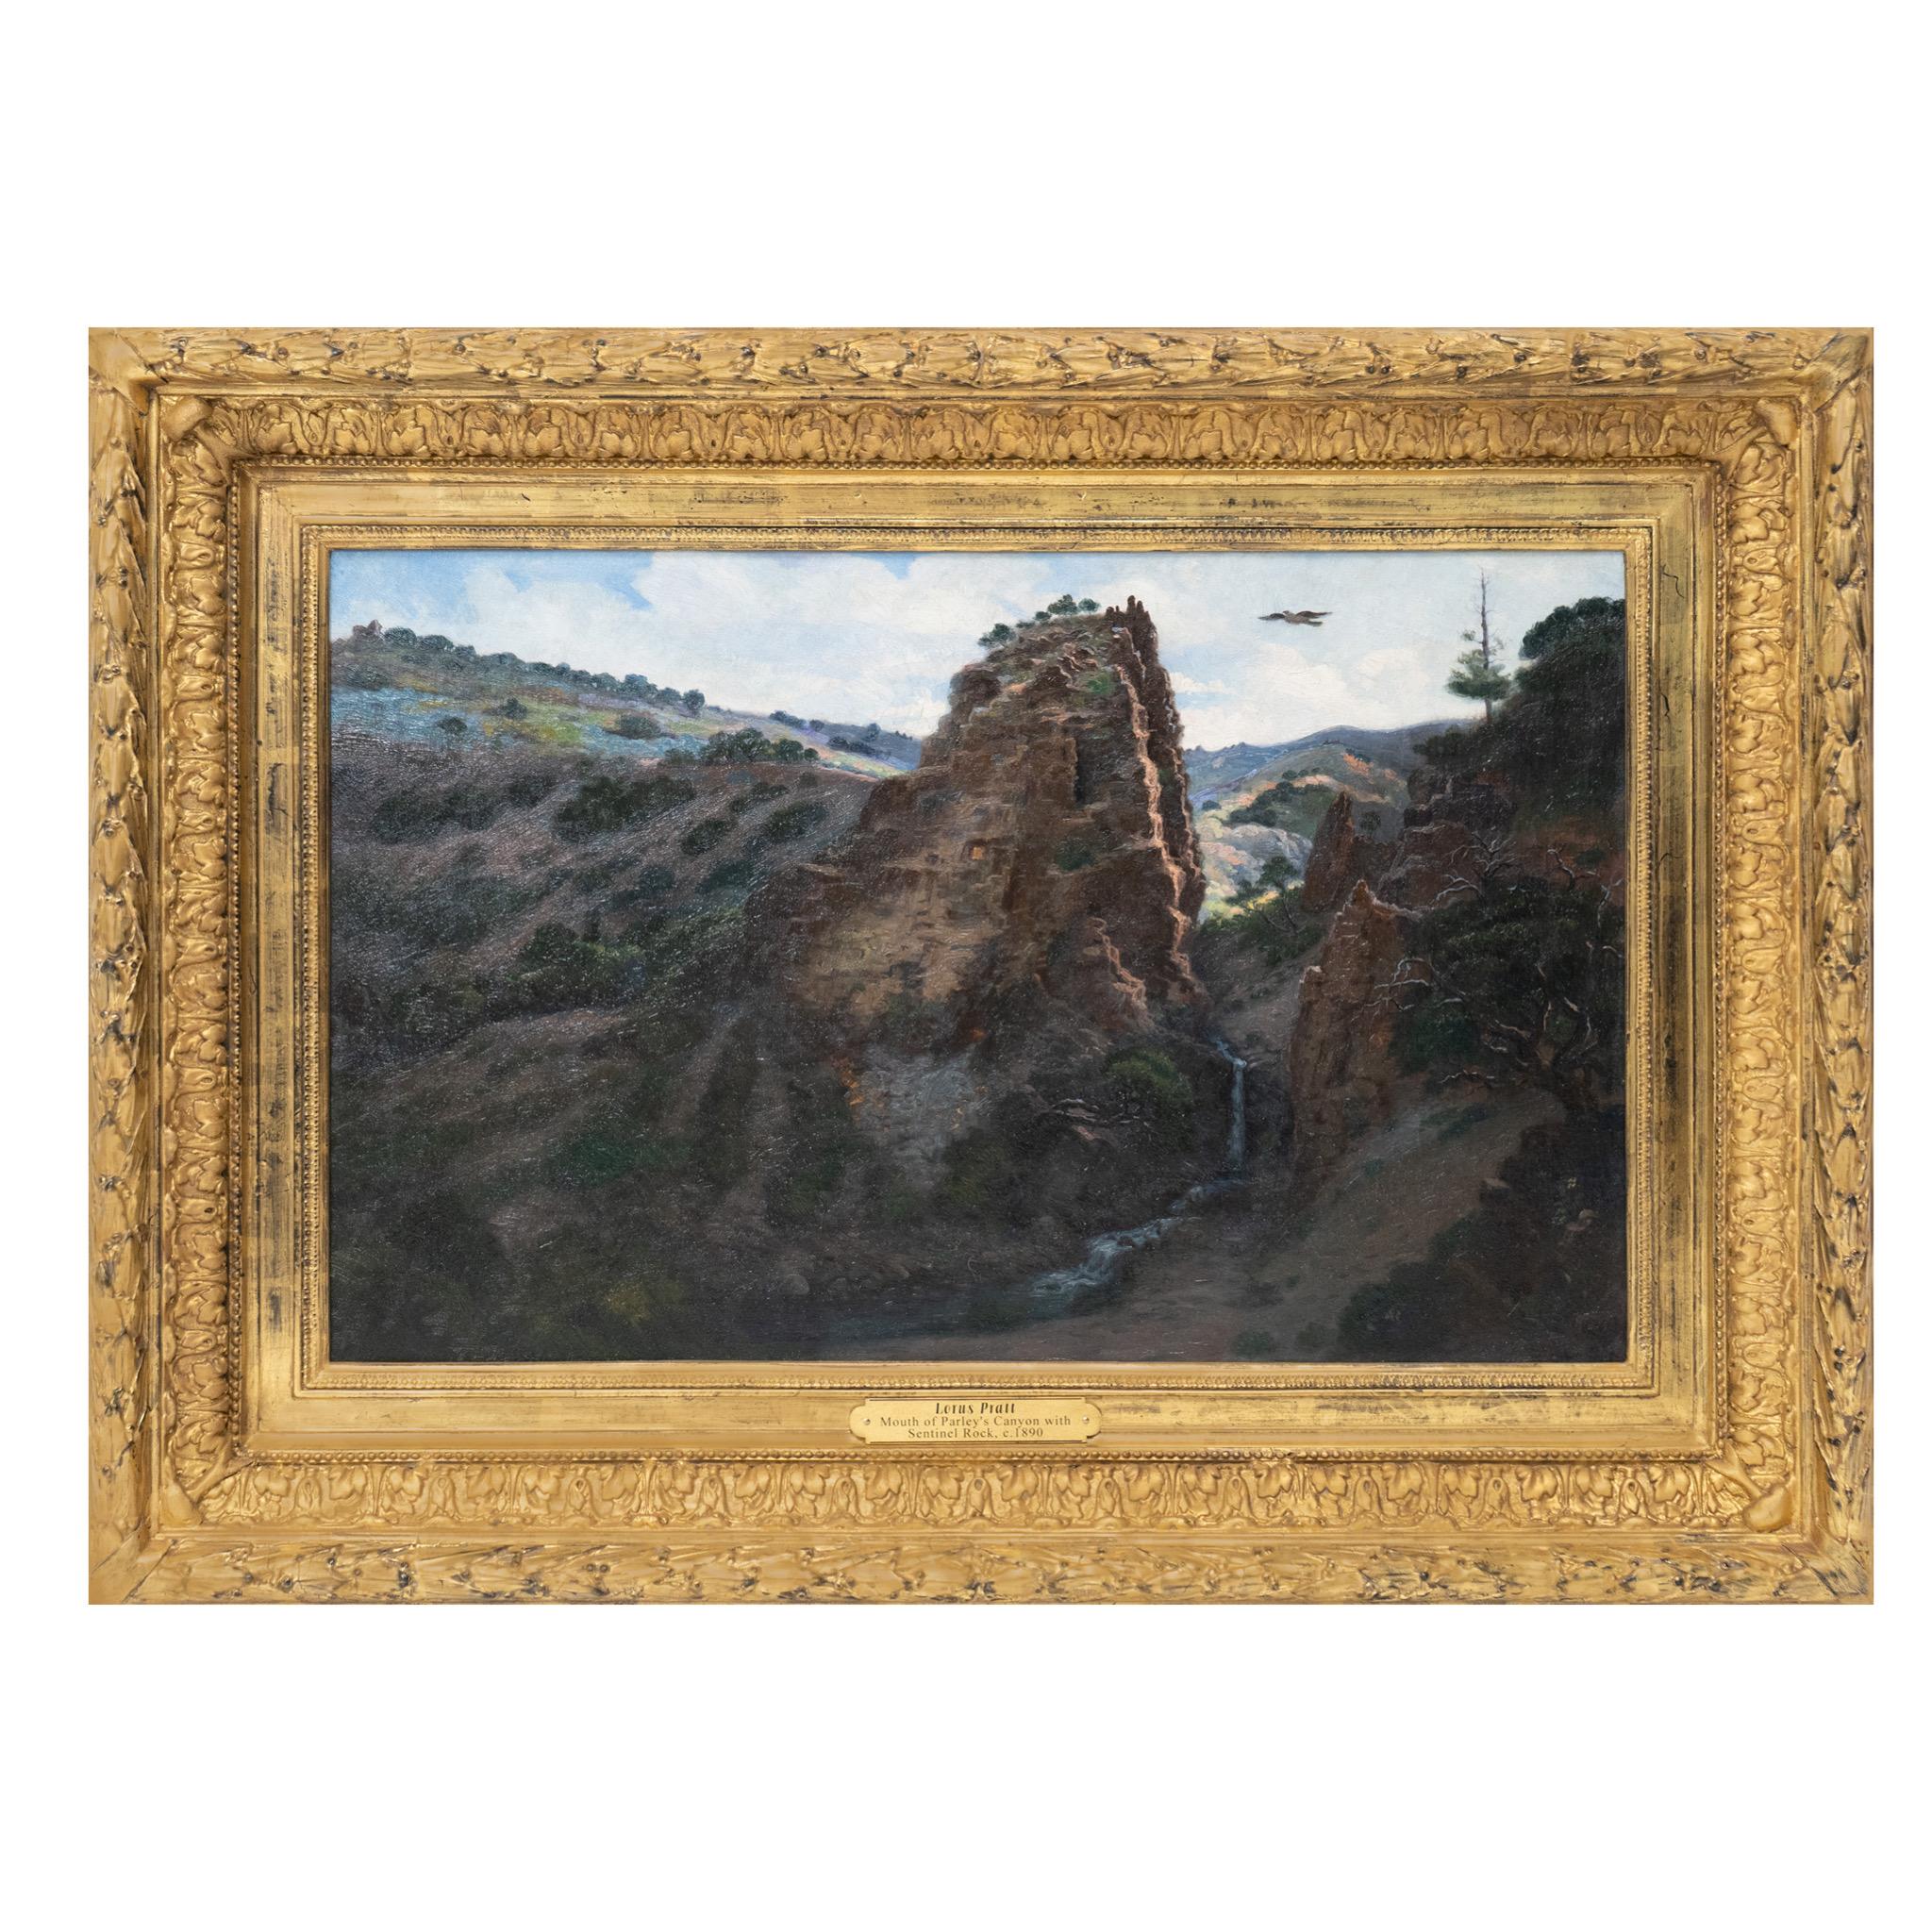 Lorus Pratt Landscape Painting - Mouth of Parley's Canyon with Sentinel Rock